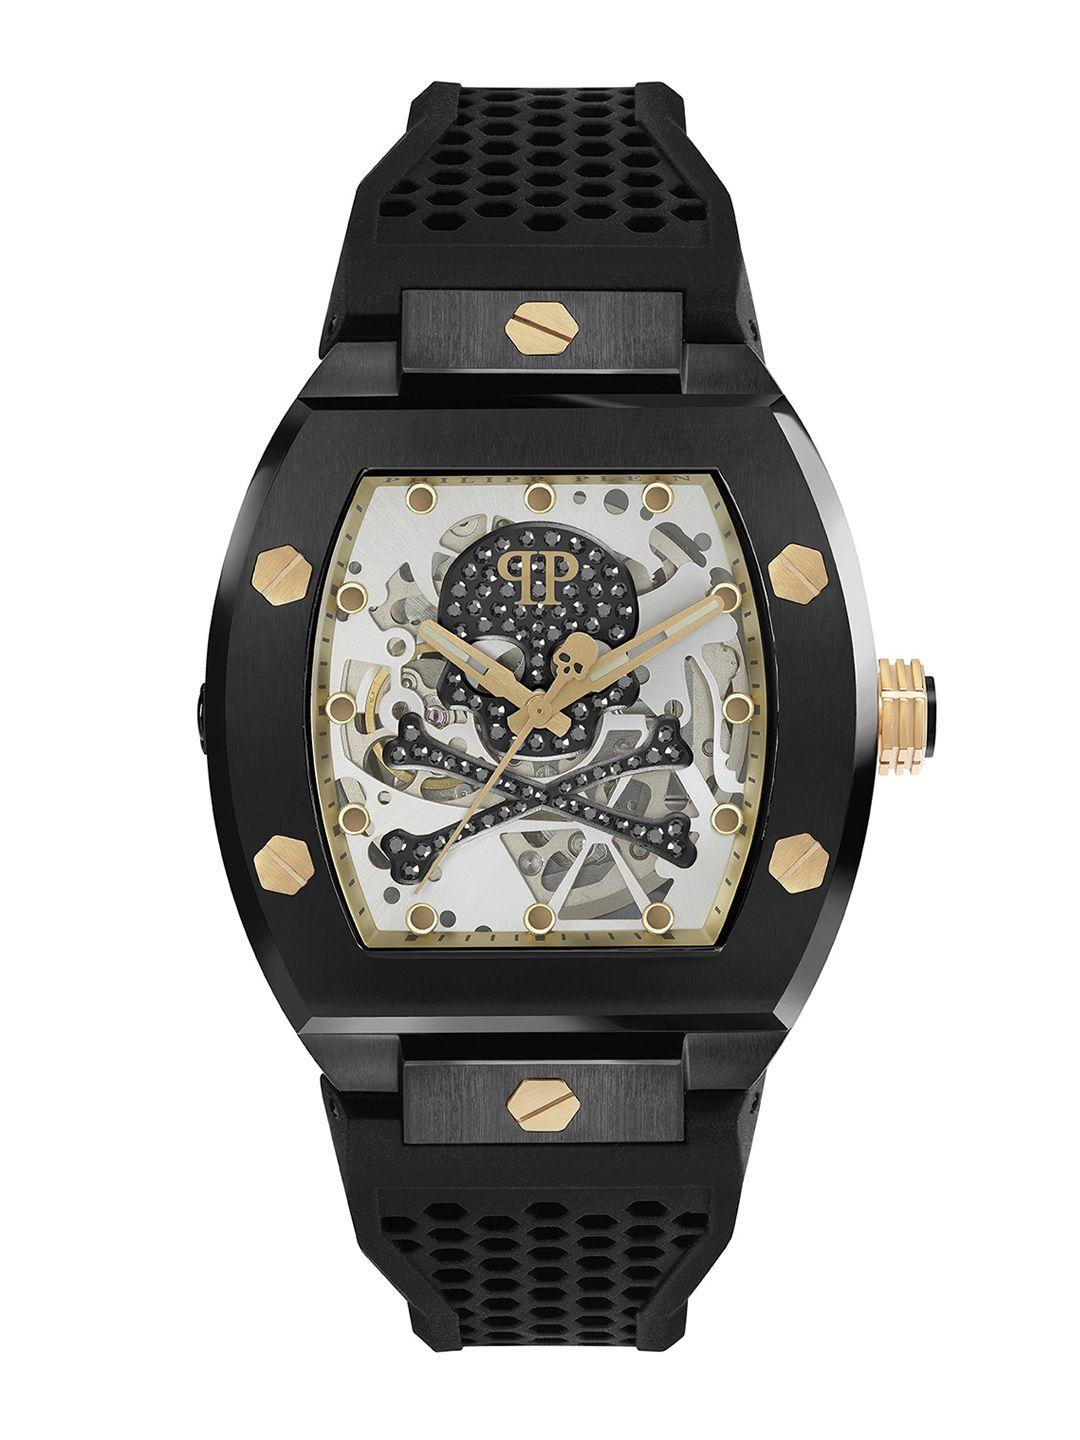 philipp plein men printed dial & textured straps analogue automatic watch pwbaa0521